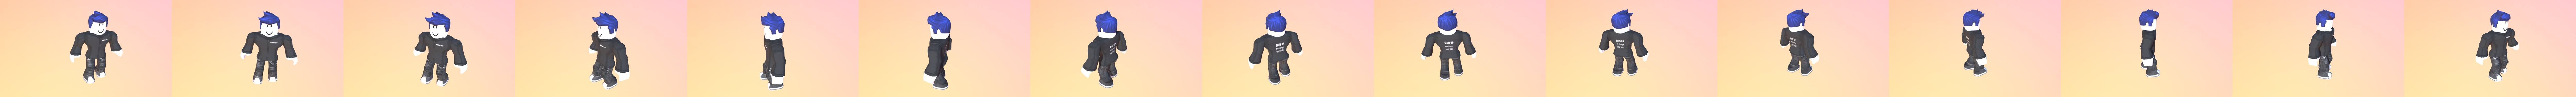 Guest From Roblox Download Free 3d Model By Guest 666manthingy